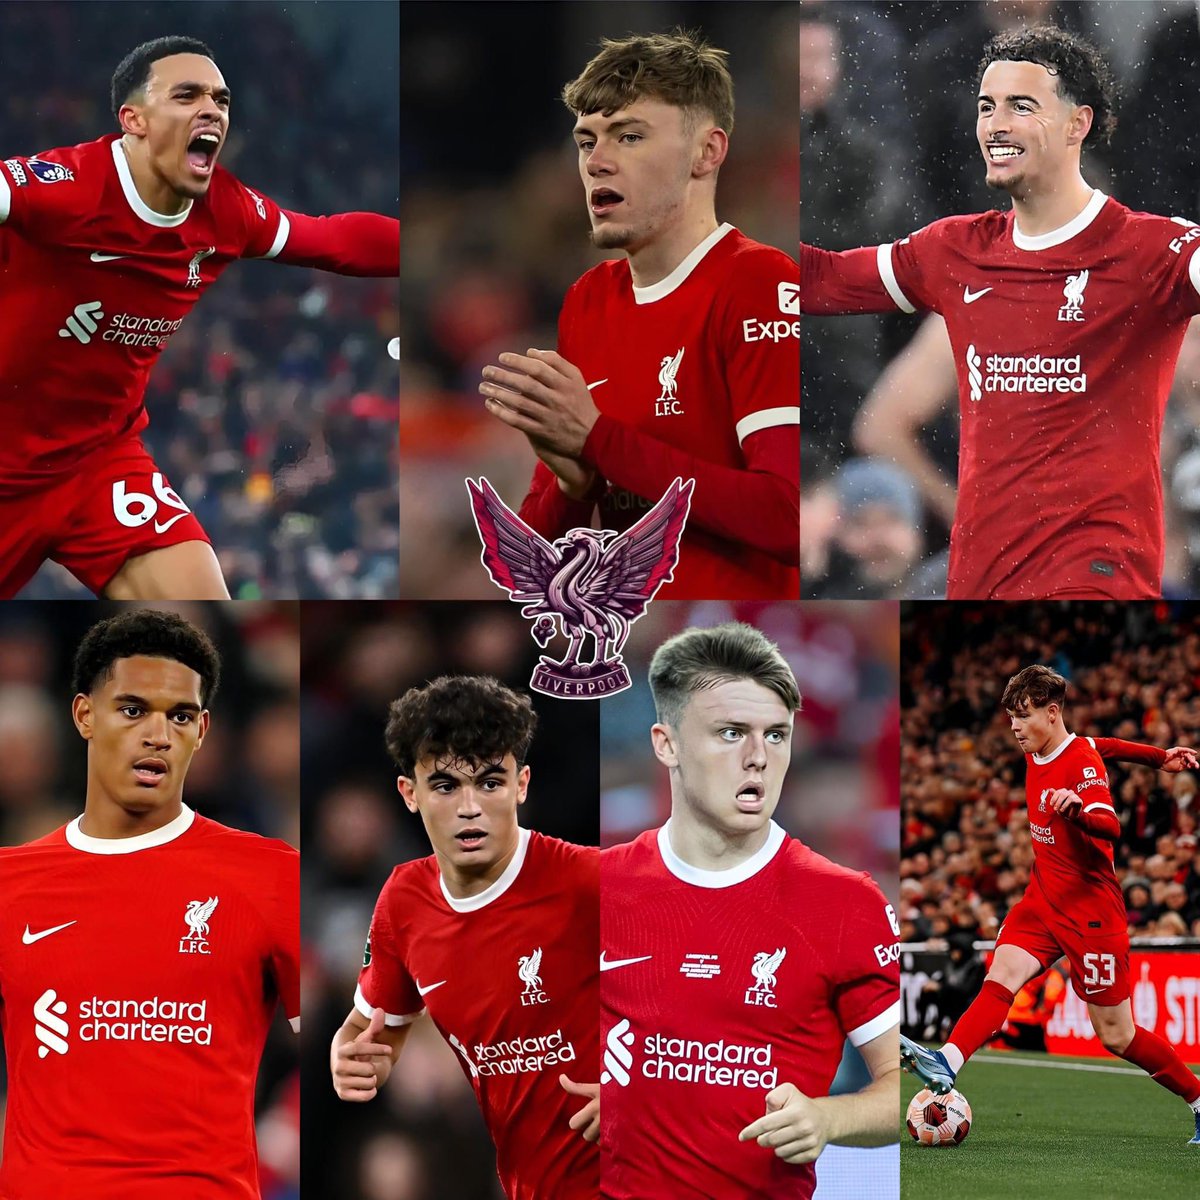 All made in the Liverpool academy 💫 

Do we have the most underrated academy in the world right now?

#liverpool #YNWA #YNWAFOREVER #LiverpoolFC #EPL #LFC #anfield #liverpoolnews #liverpoolfcfans